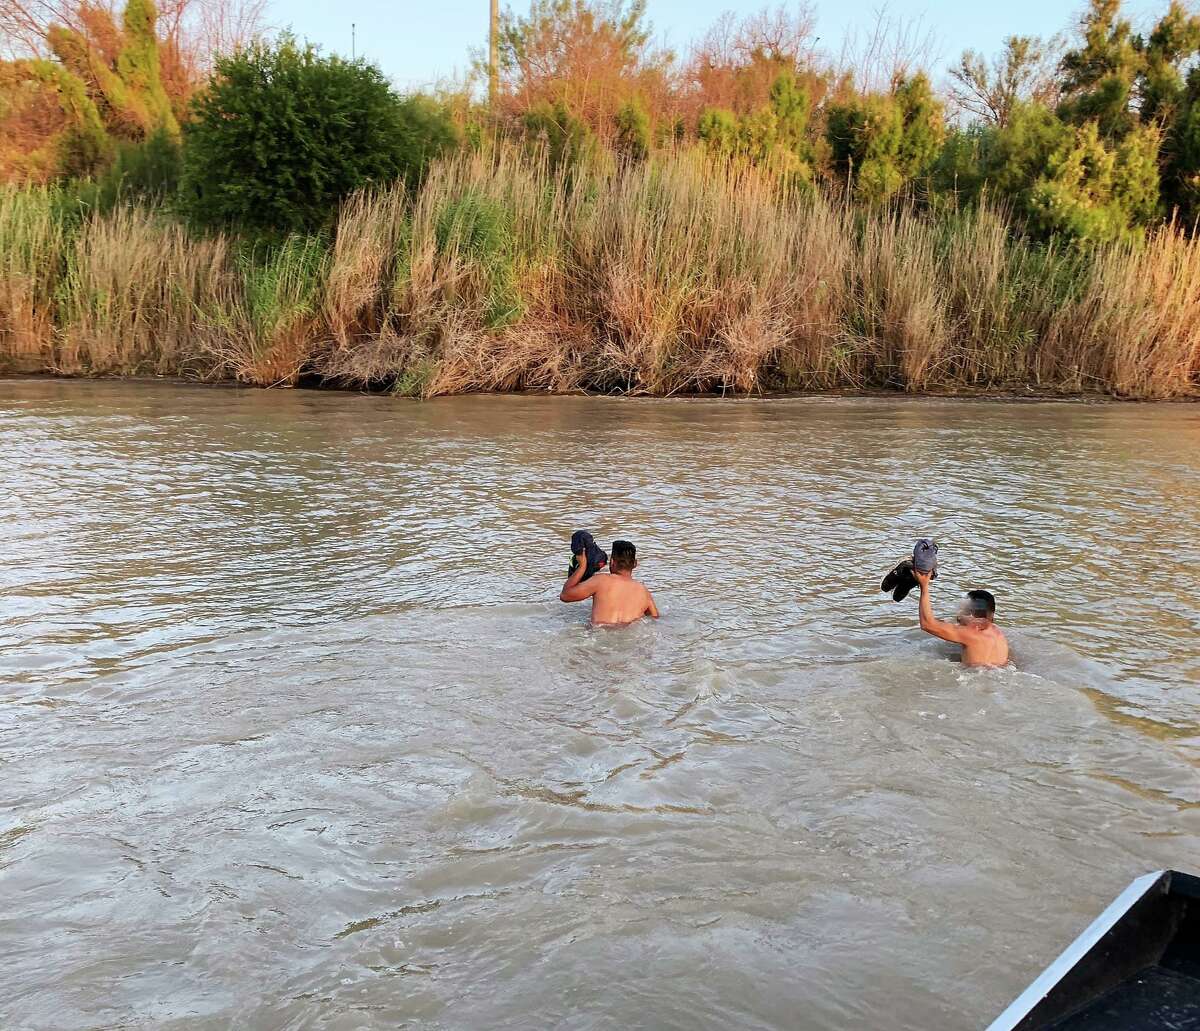 The U.S. Border Patrol’s Marine Unit recently stopped a pair of incidents involving migrants attempting to swim across the Rio Grande and enter the country illegally.